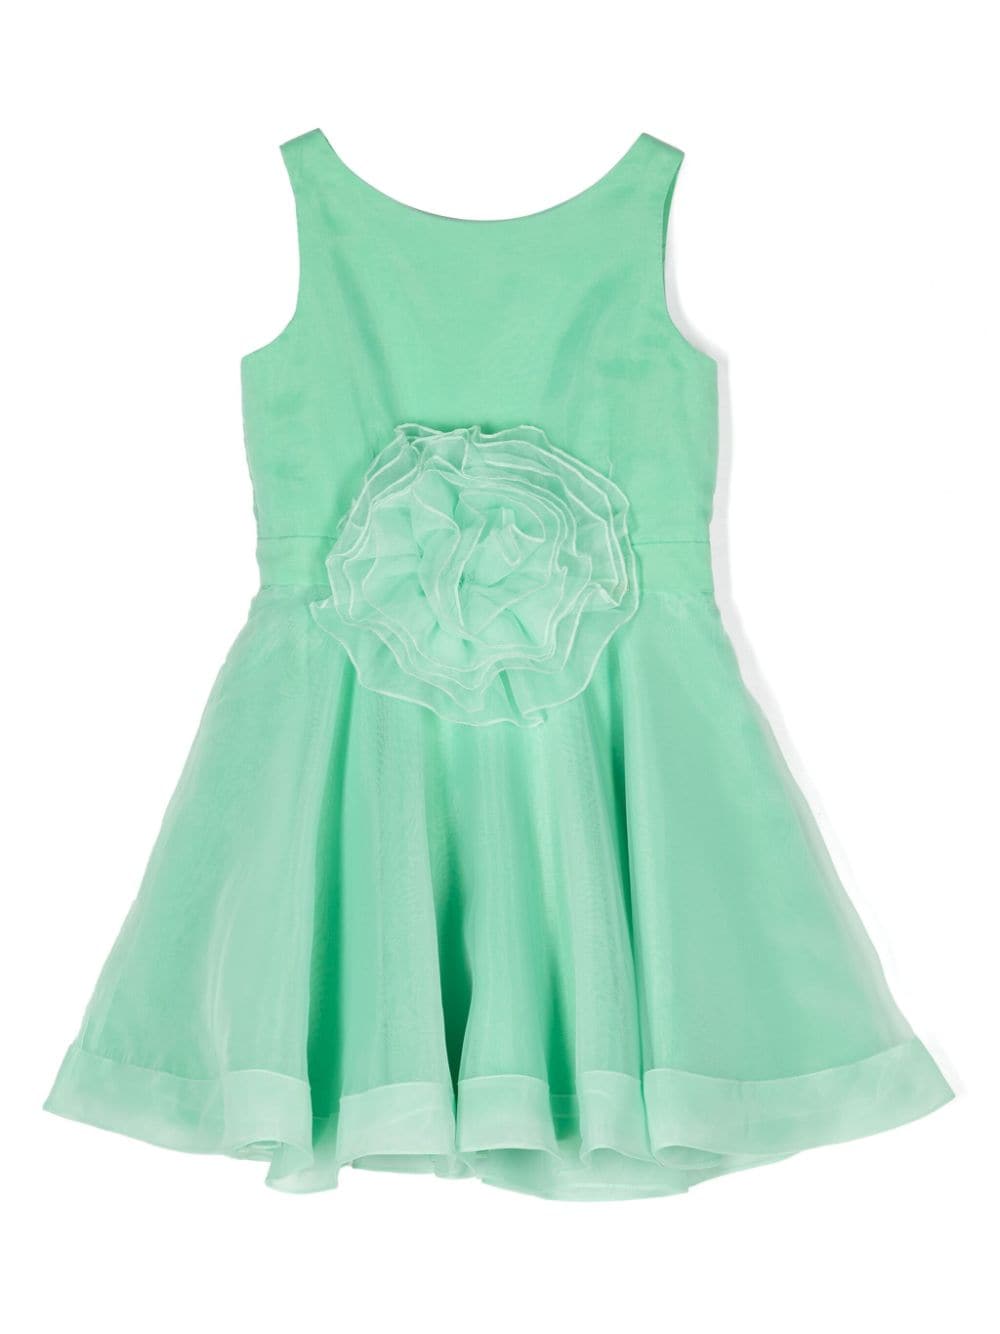 Green dress for little girls with flowers